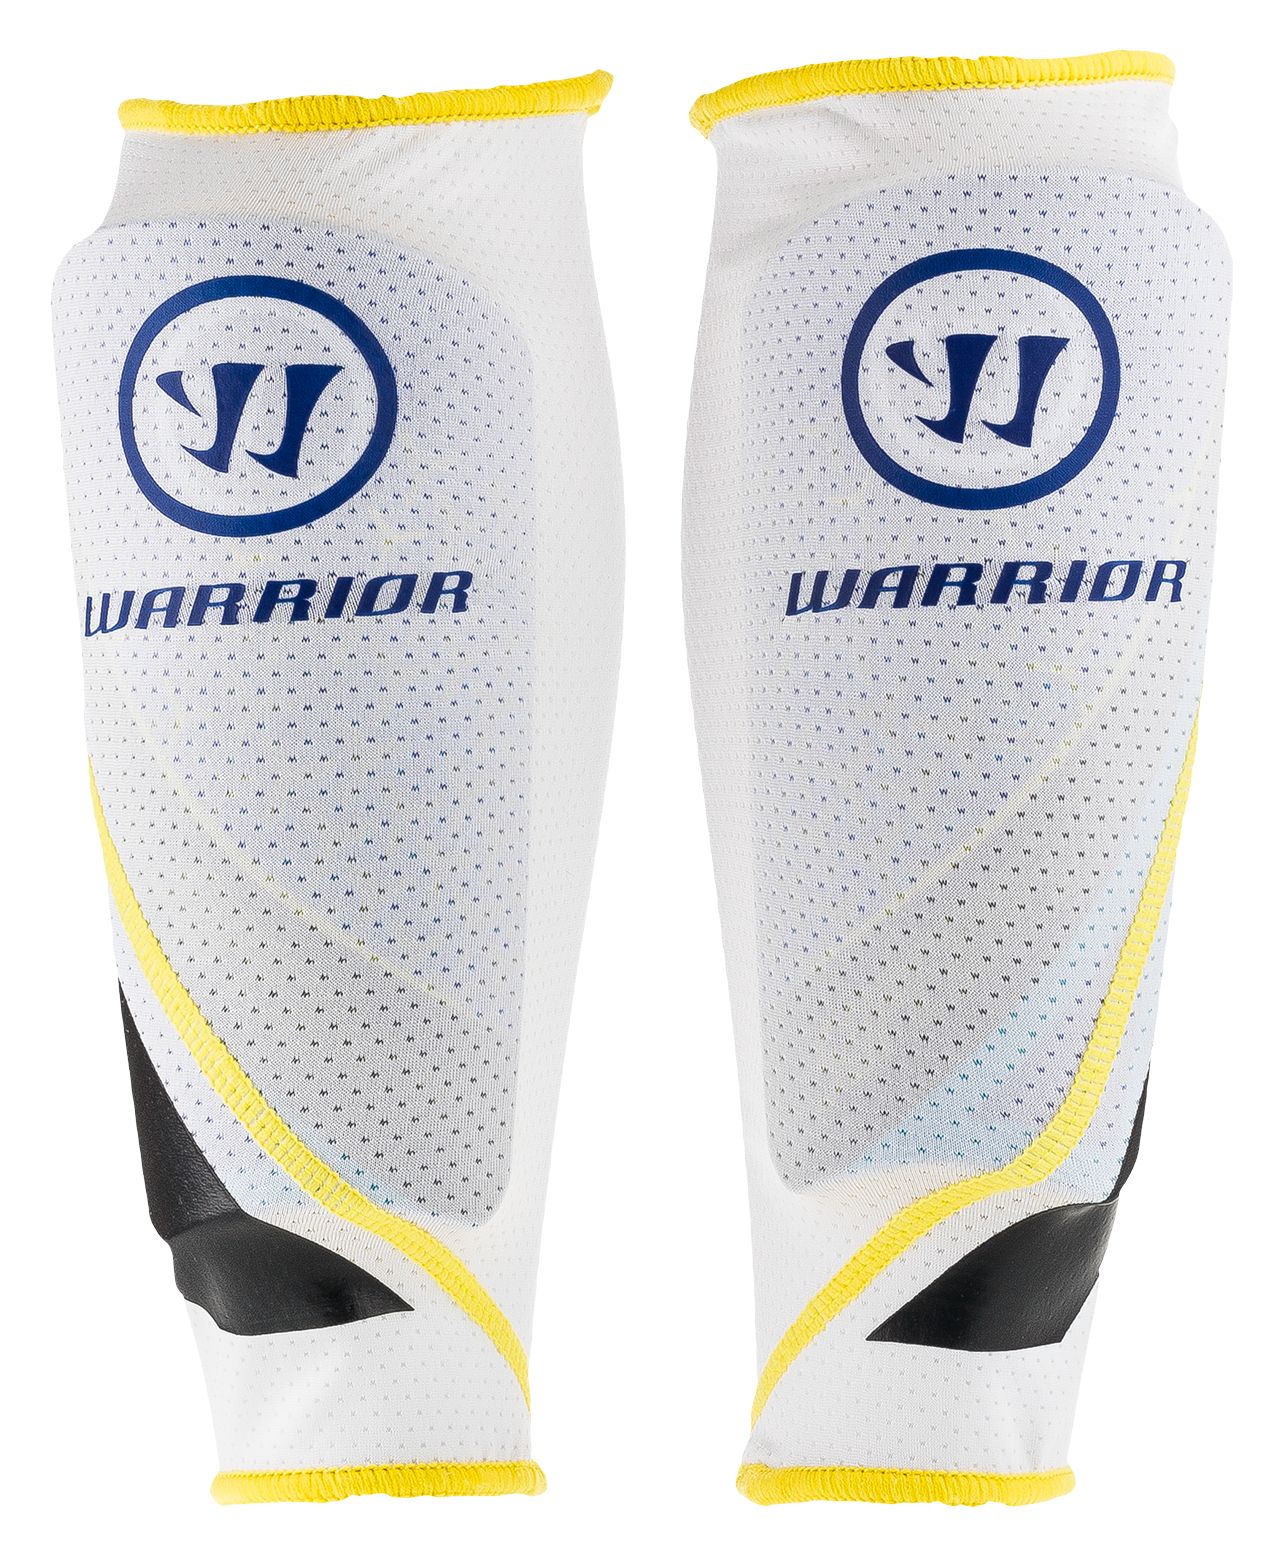 Superheat Chrome Shinguard, Blue with Aviator & Cyber Yellow image number 2